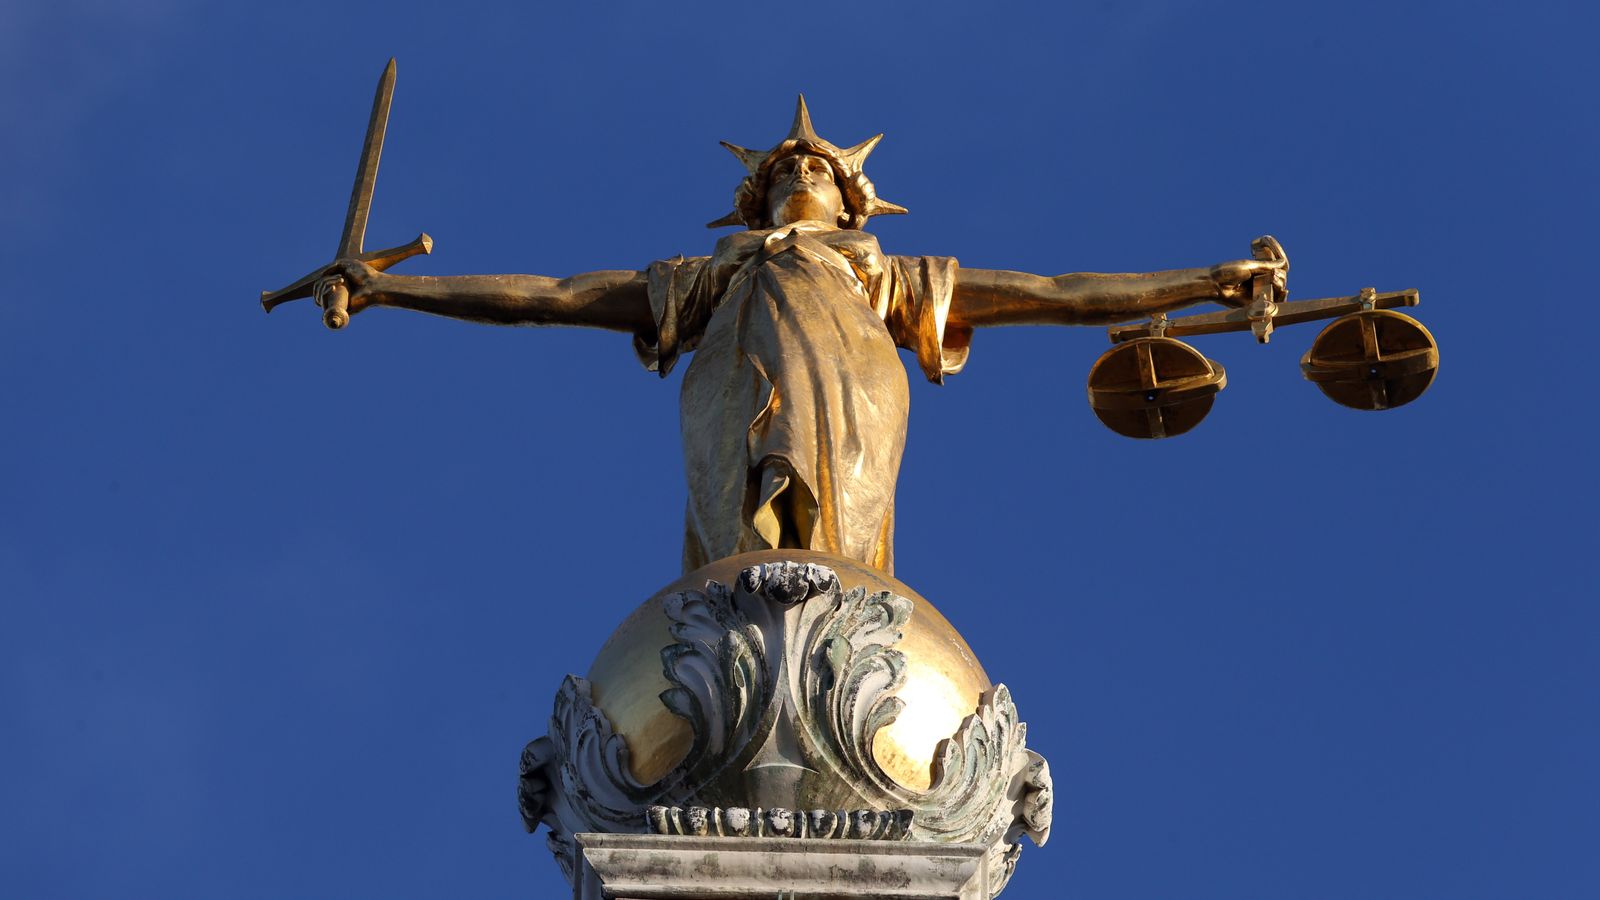 Nearly 200 'very old' rape case trials could begin by end of July after years of delays